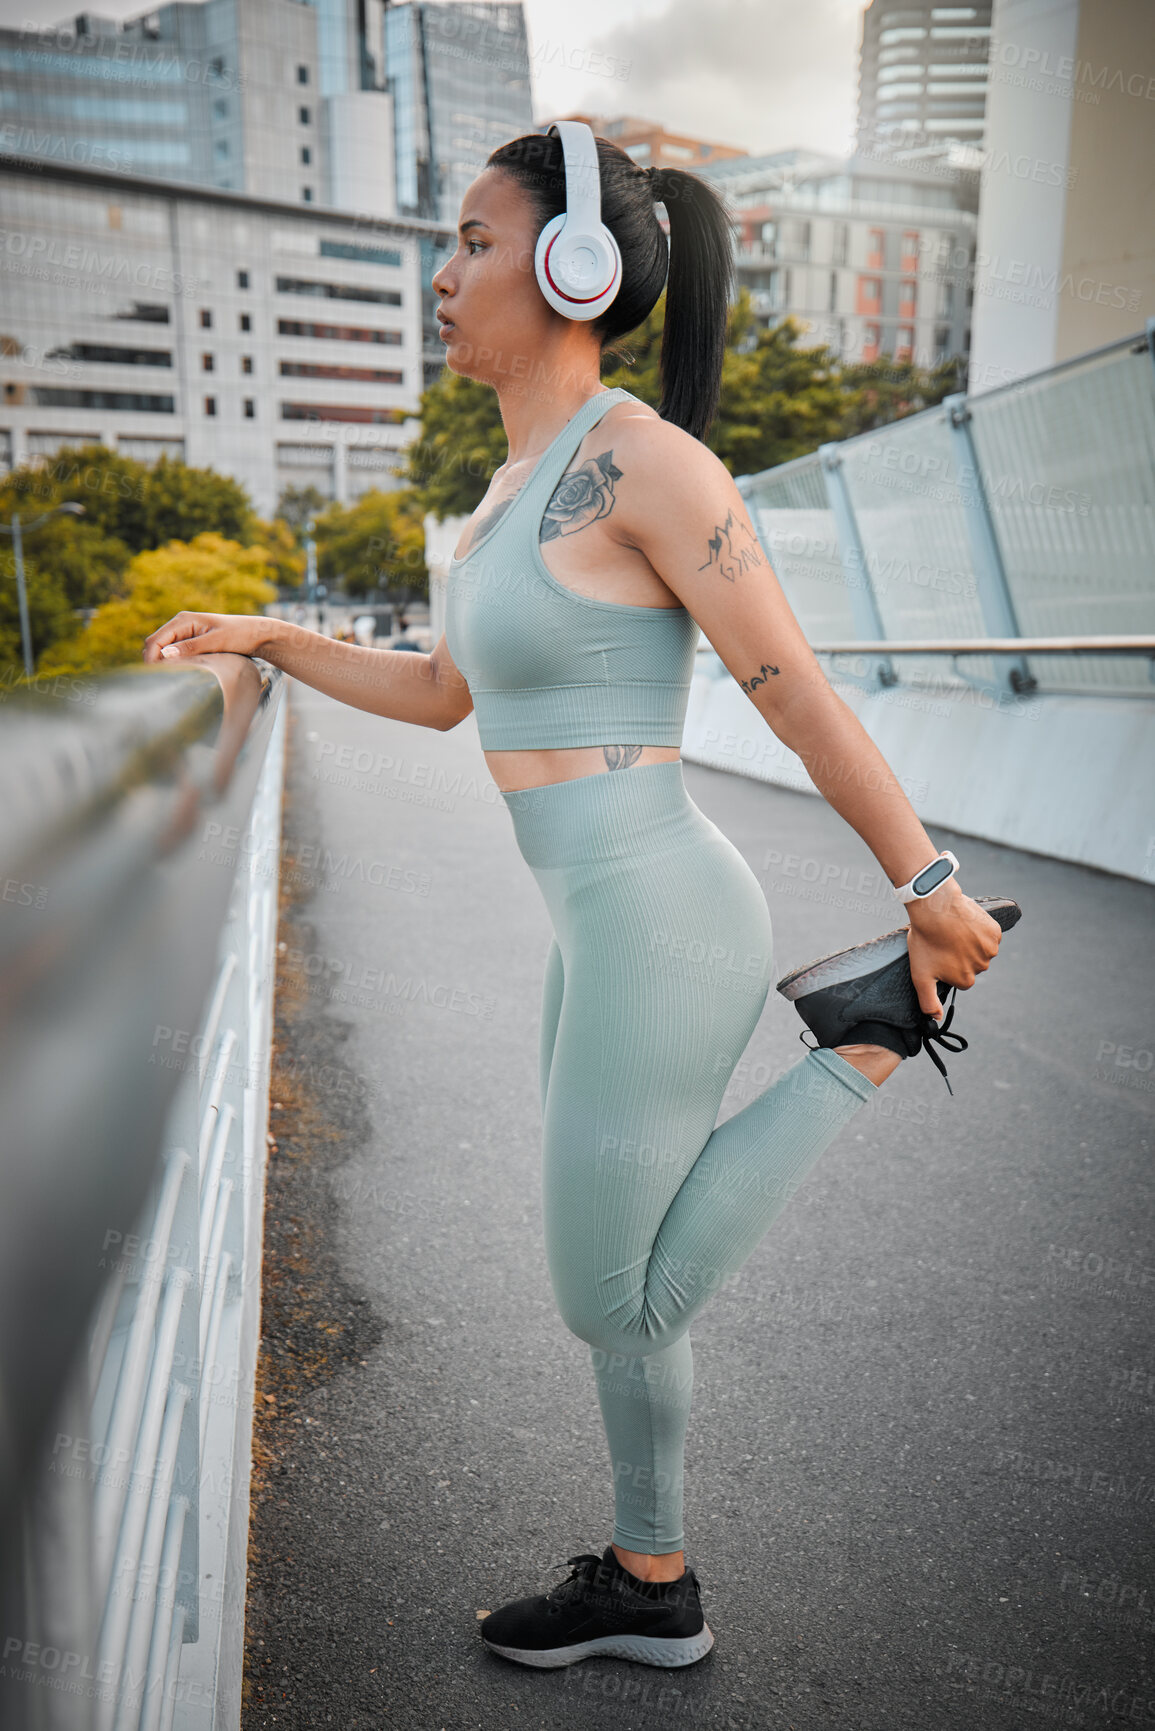 Buy stock photo One young fit and active mixed race woman standing alone and stretching before exercising in a city. Hispanic athlete focused on health and wellness, warming up and listening to music on headphones while out for a run